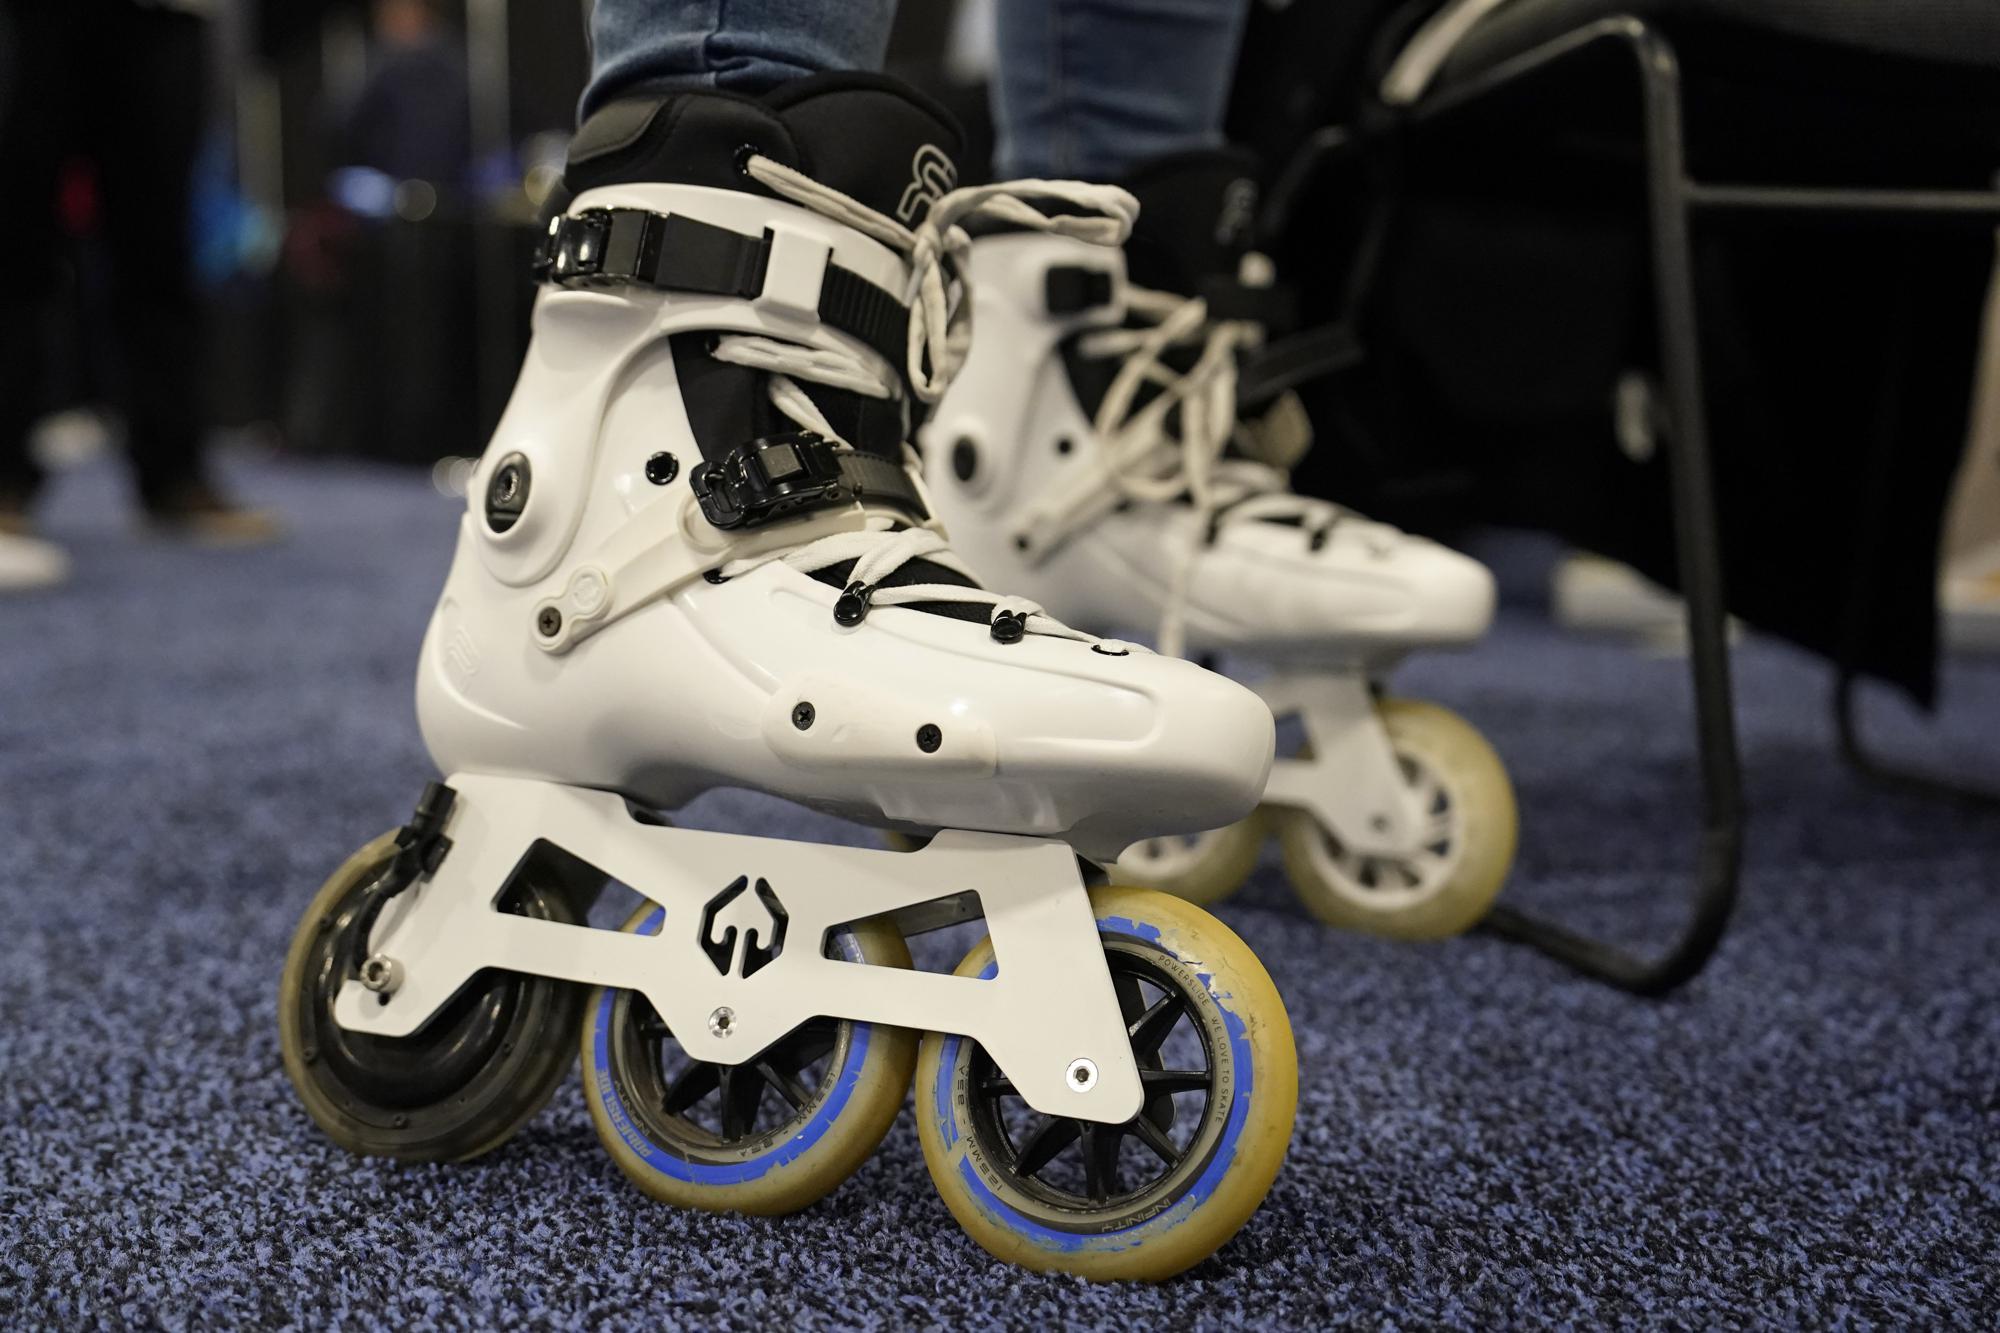 Mohamed Soliman of Atmos Gear shows off the Atmos Gear inline electric skates during CES Unveiled. /AP